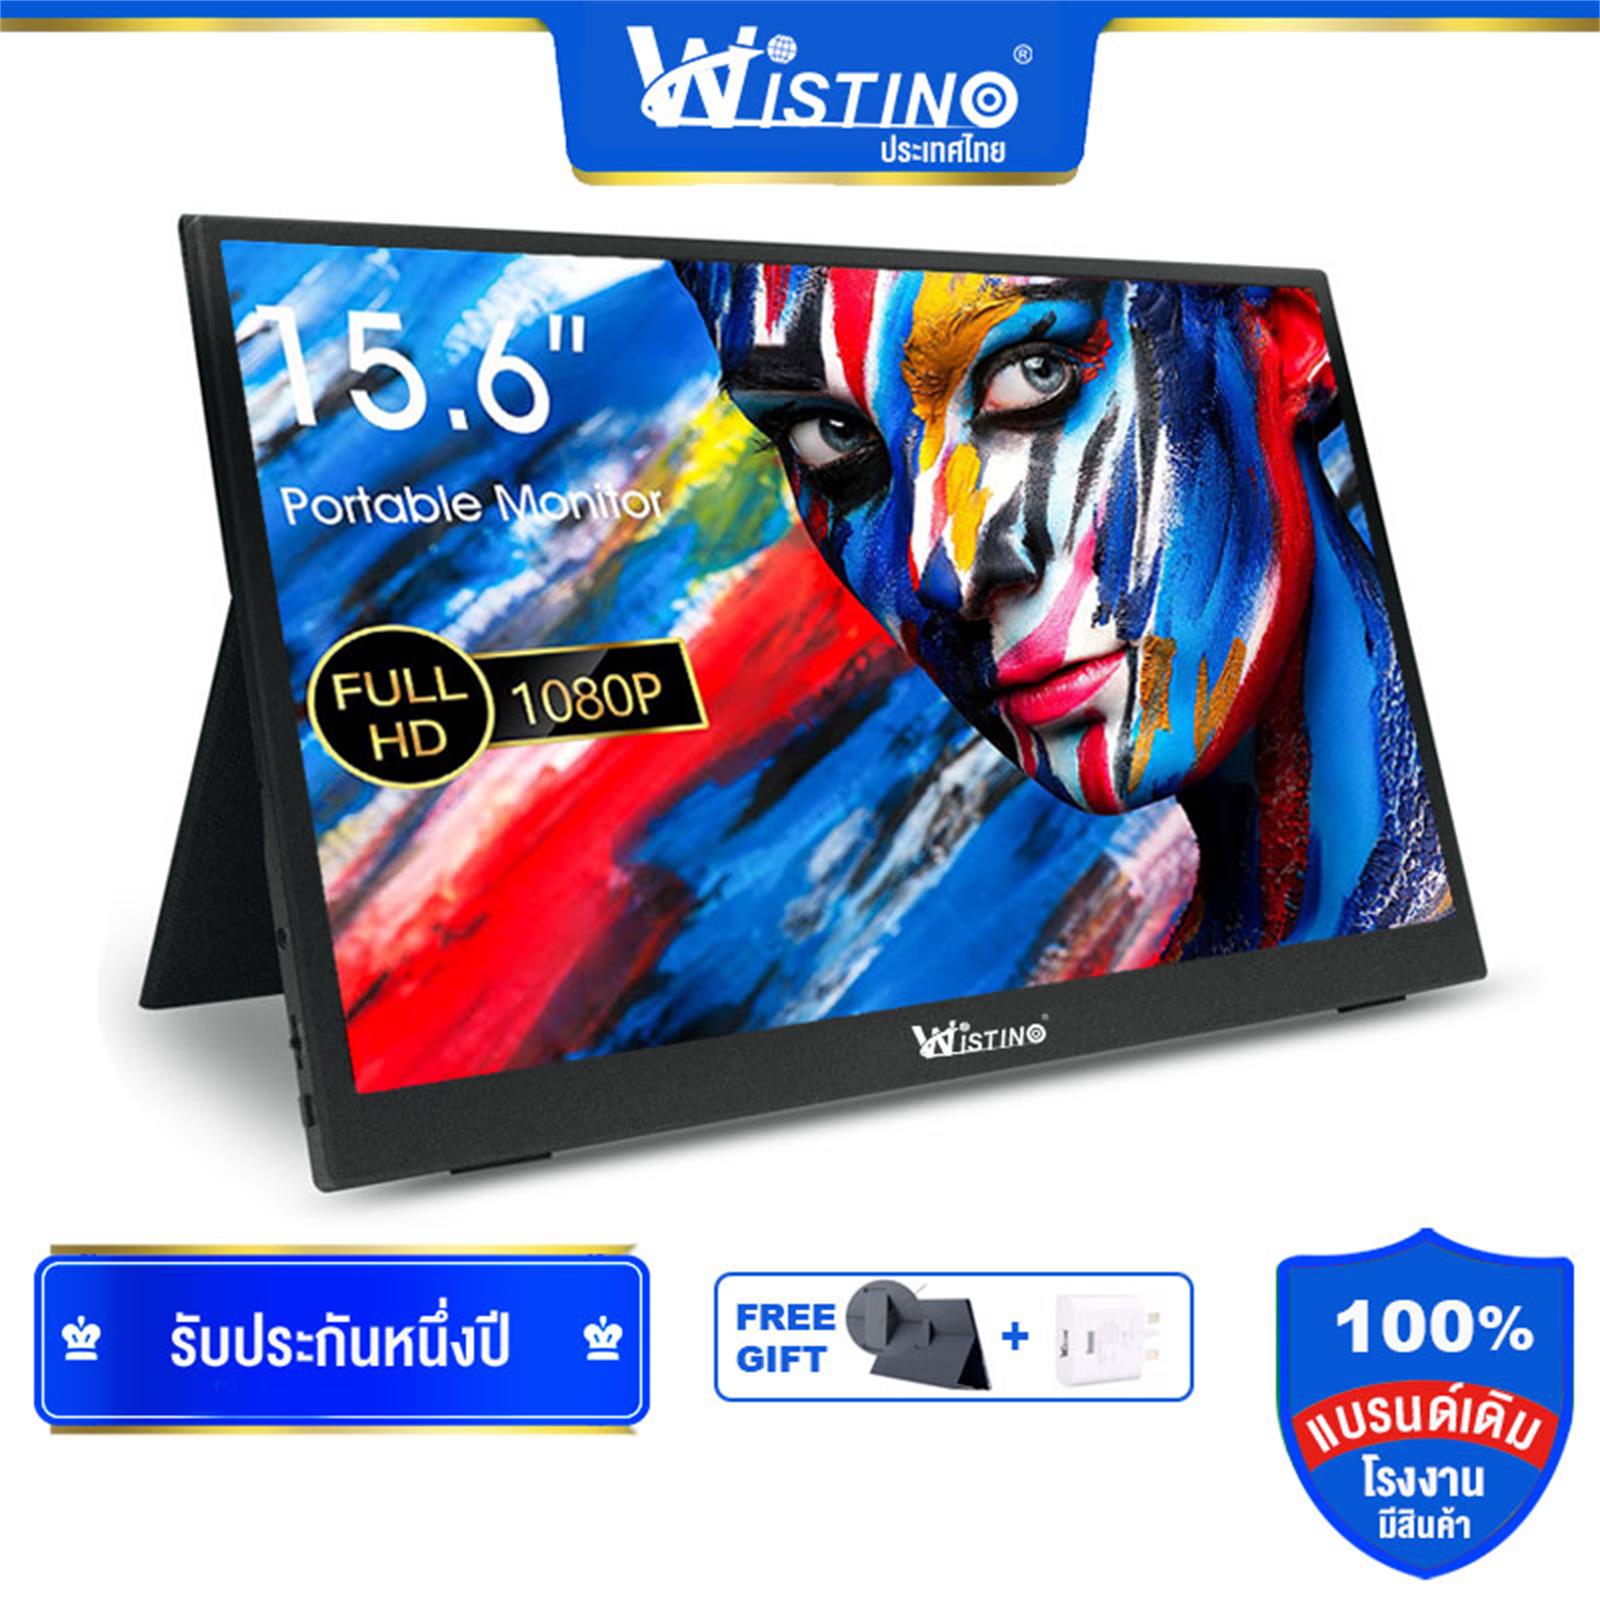 Wistino thin portable lcd hd monitor 15.6 usb type c hdmi for laptop,phone,xbox,switch and ps4 portable lcd gaming monitor